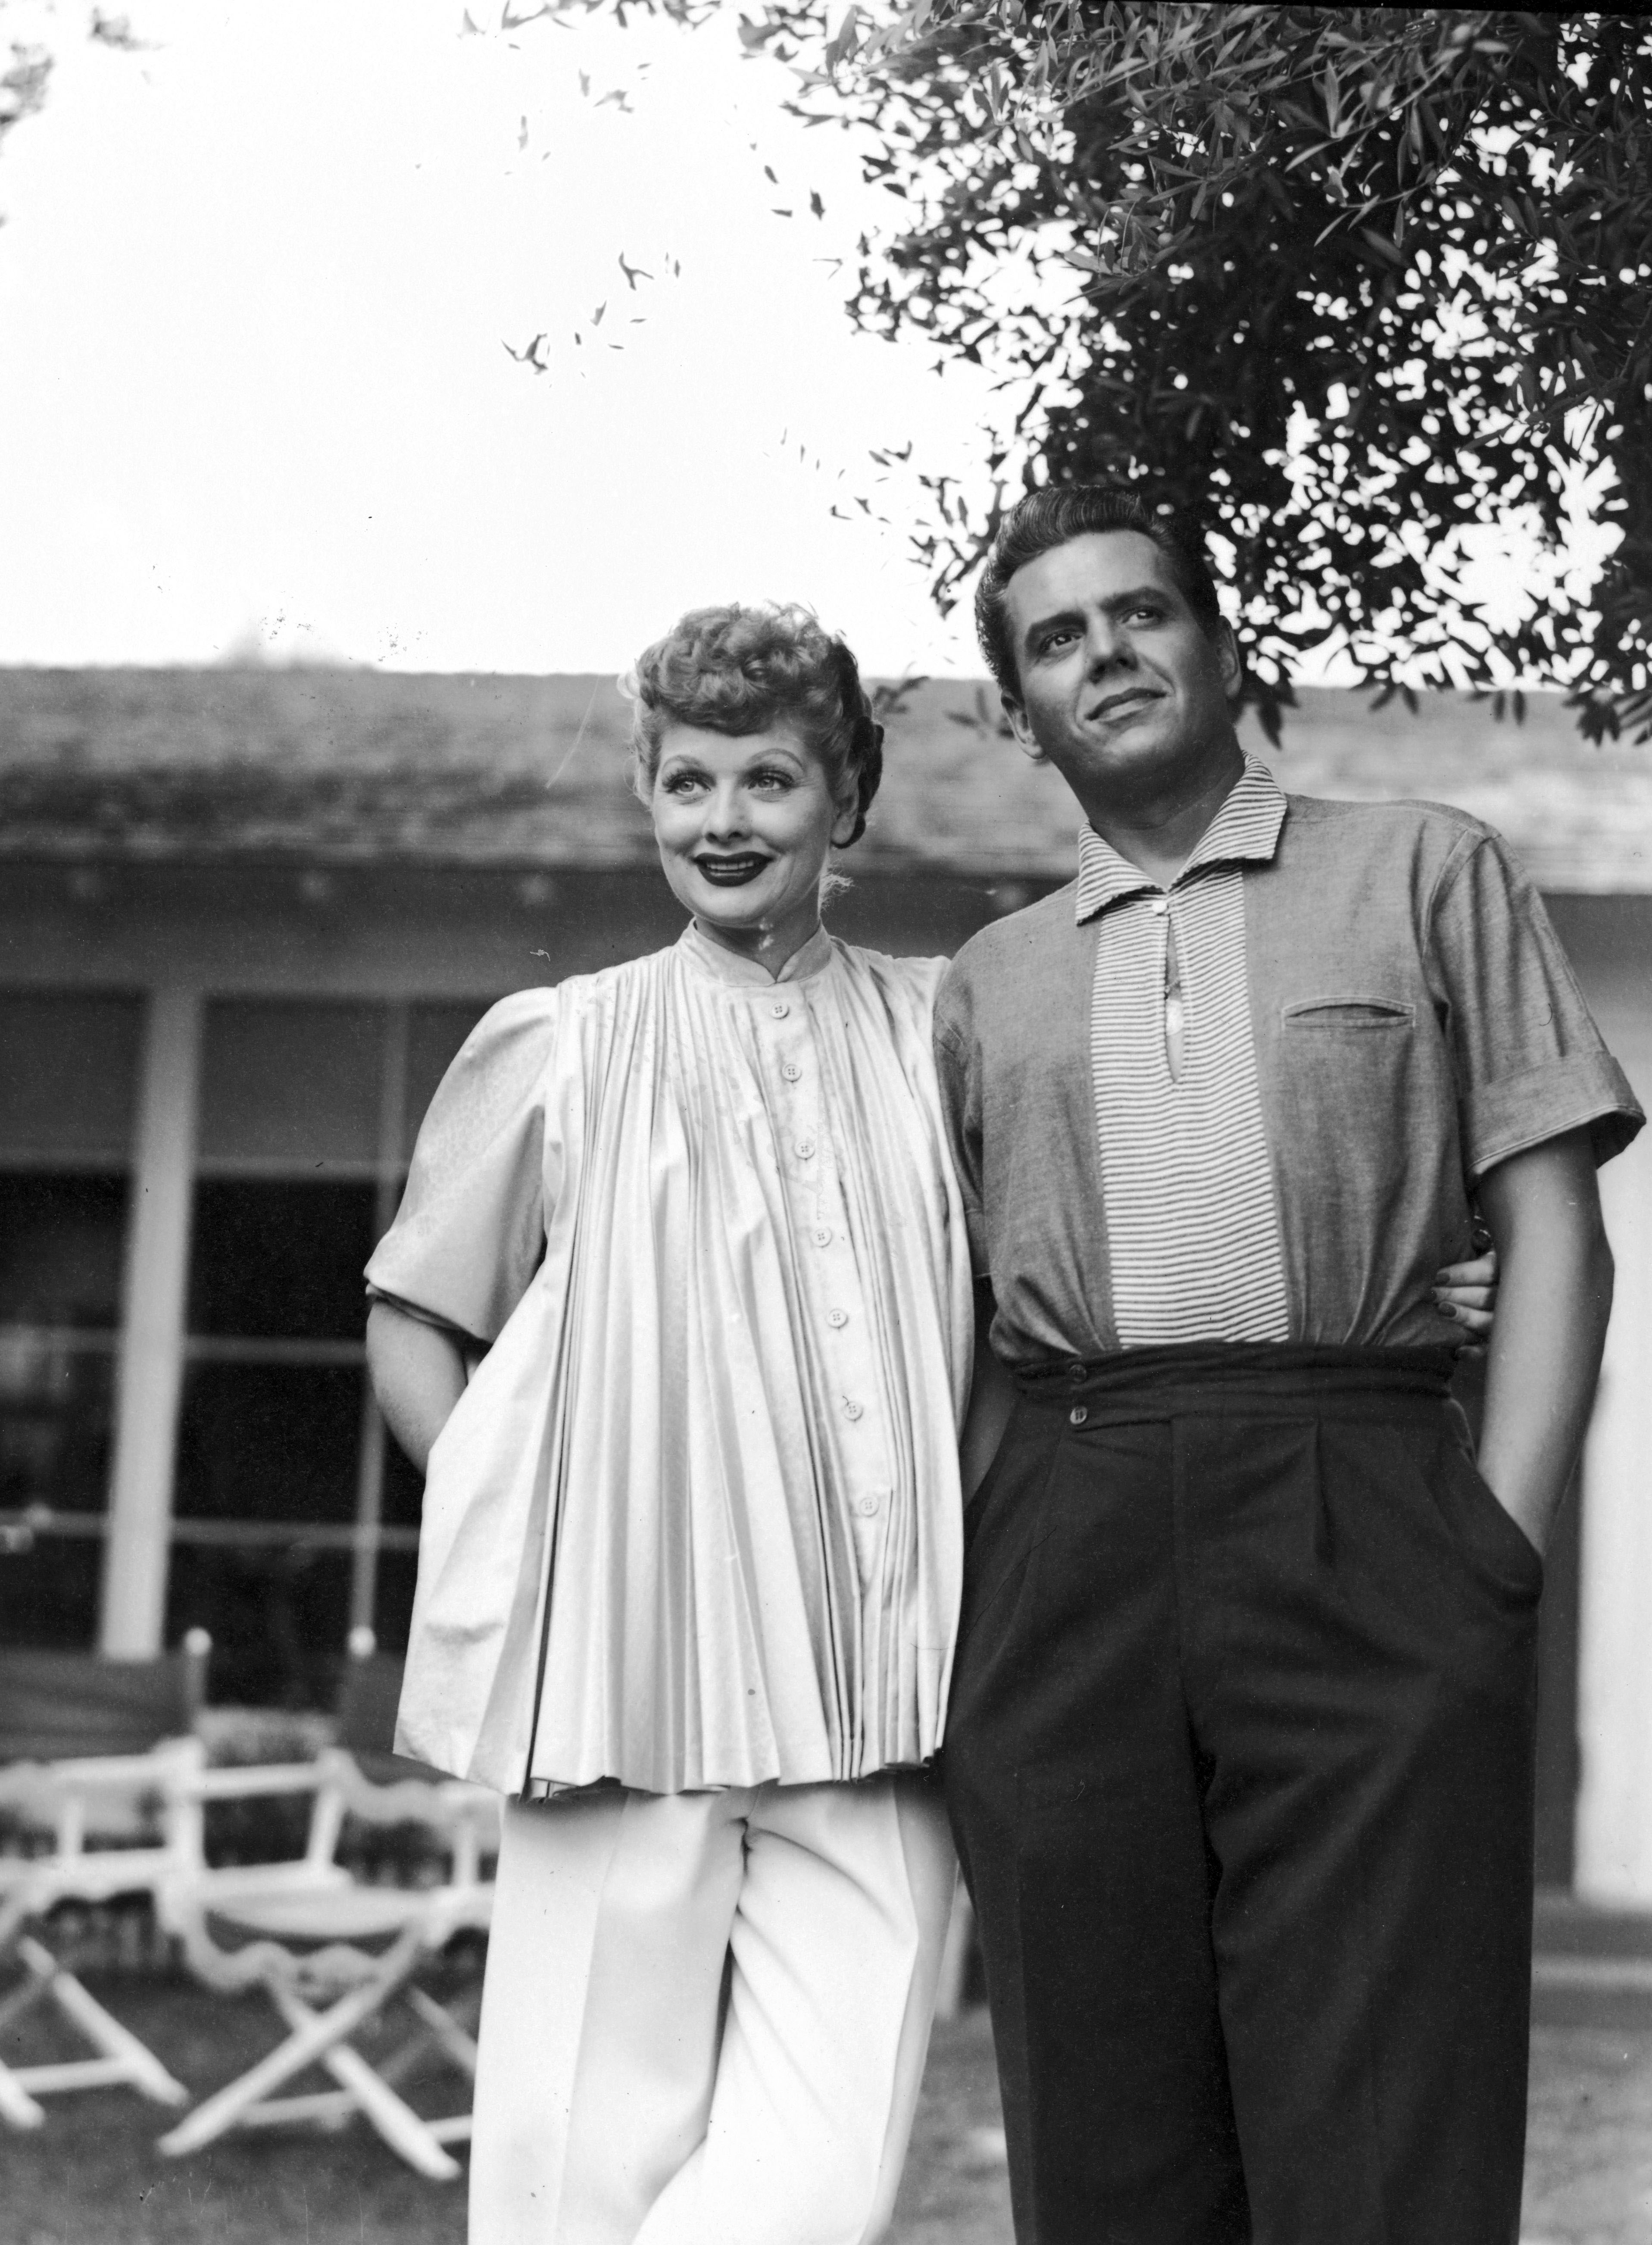 Photo of Actress Lucille Ball and her husband actor Desi Arnaz | Source: Getty Images